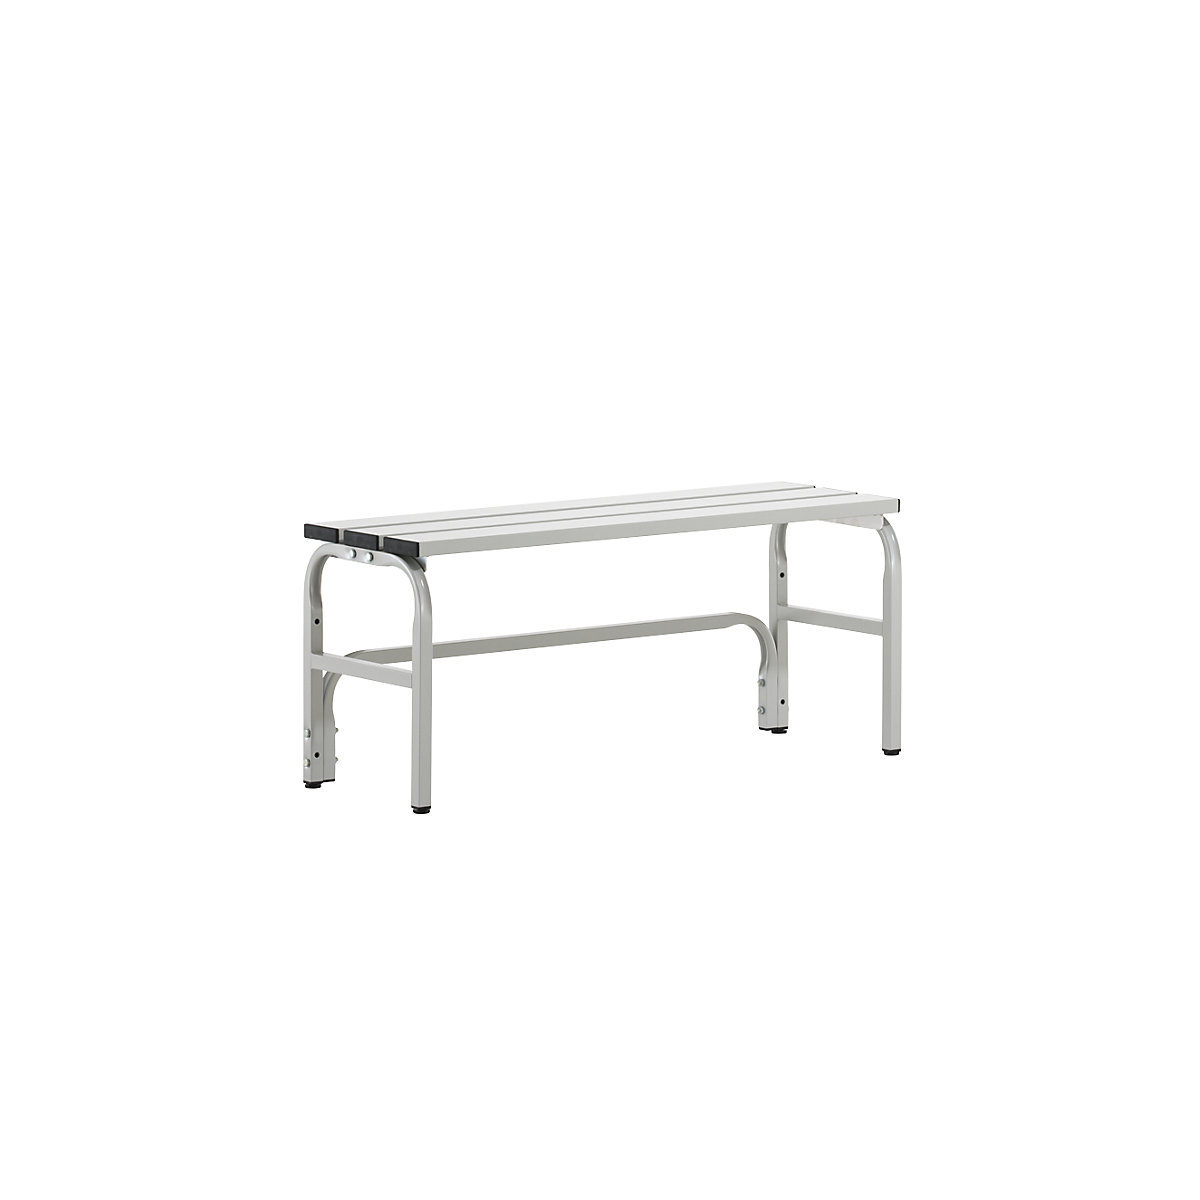 Changing room bench made of stainless steel – Sypro, HxD 450 x 350 mm, length 1015 mm, light grey-5